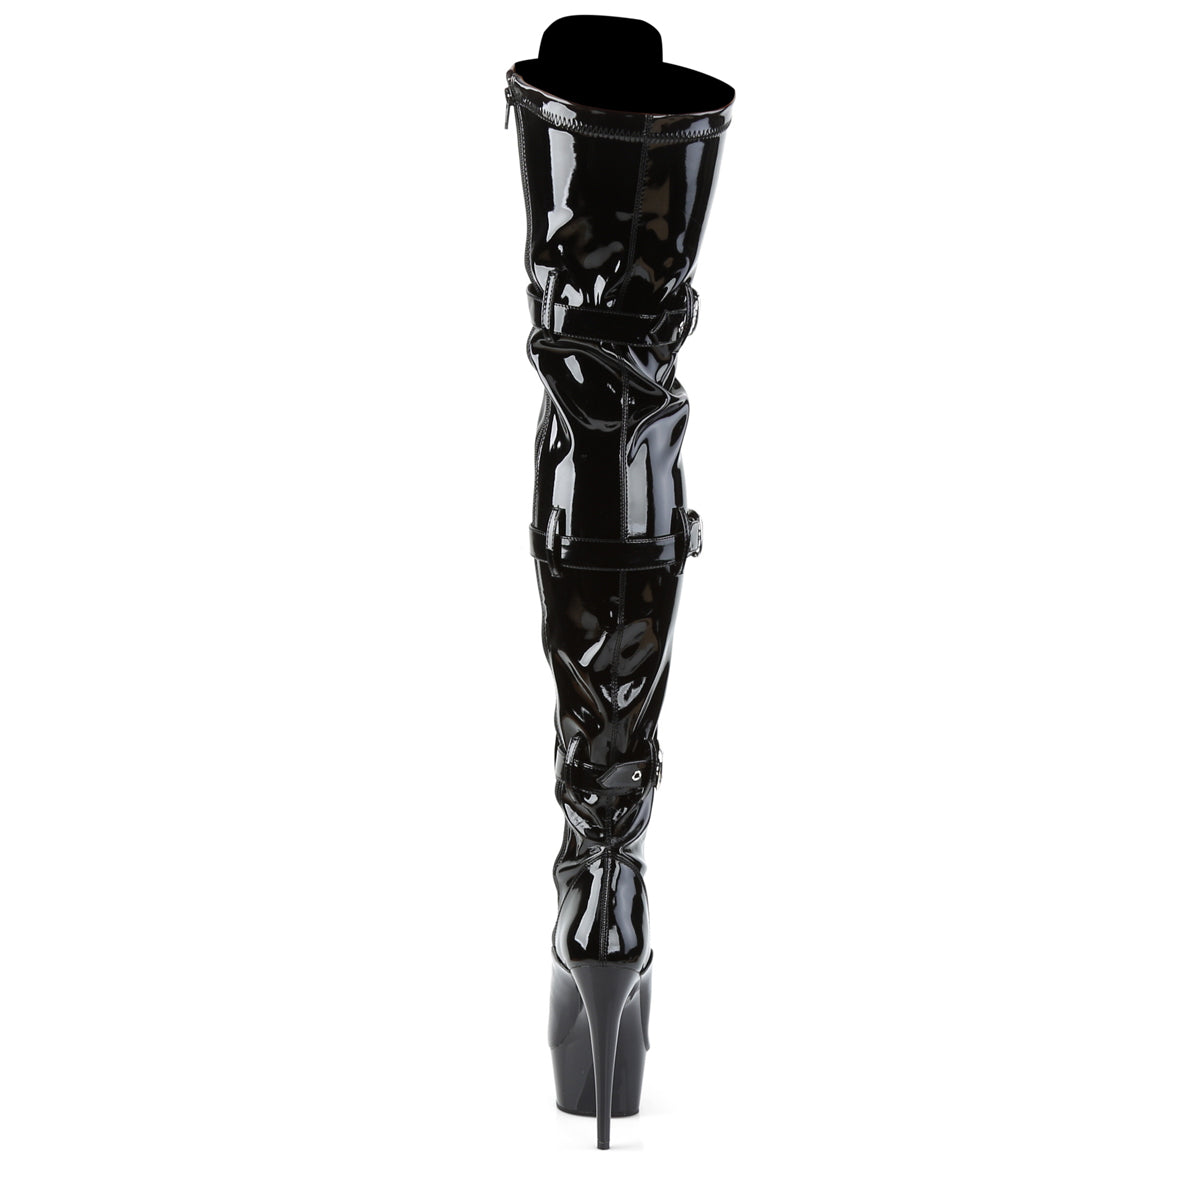 DELIGHT-3028 6" Heel Black Stretch Patent Pole Dancer Boots-Pleaser- Sexy Shoes Fetish Footwear